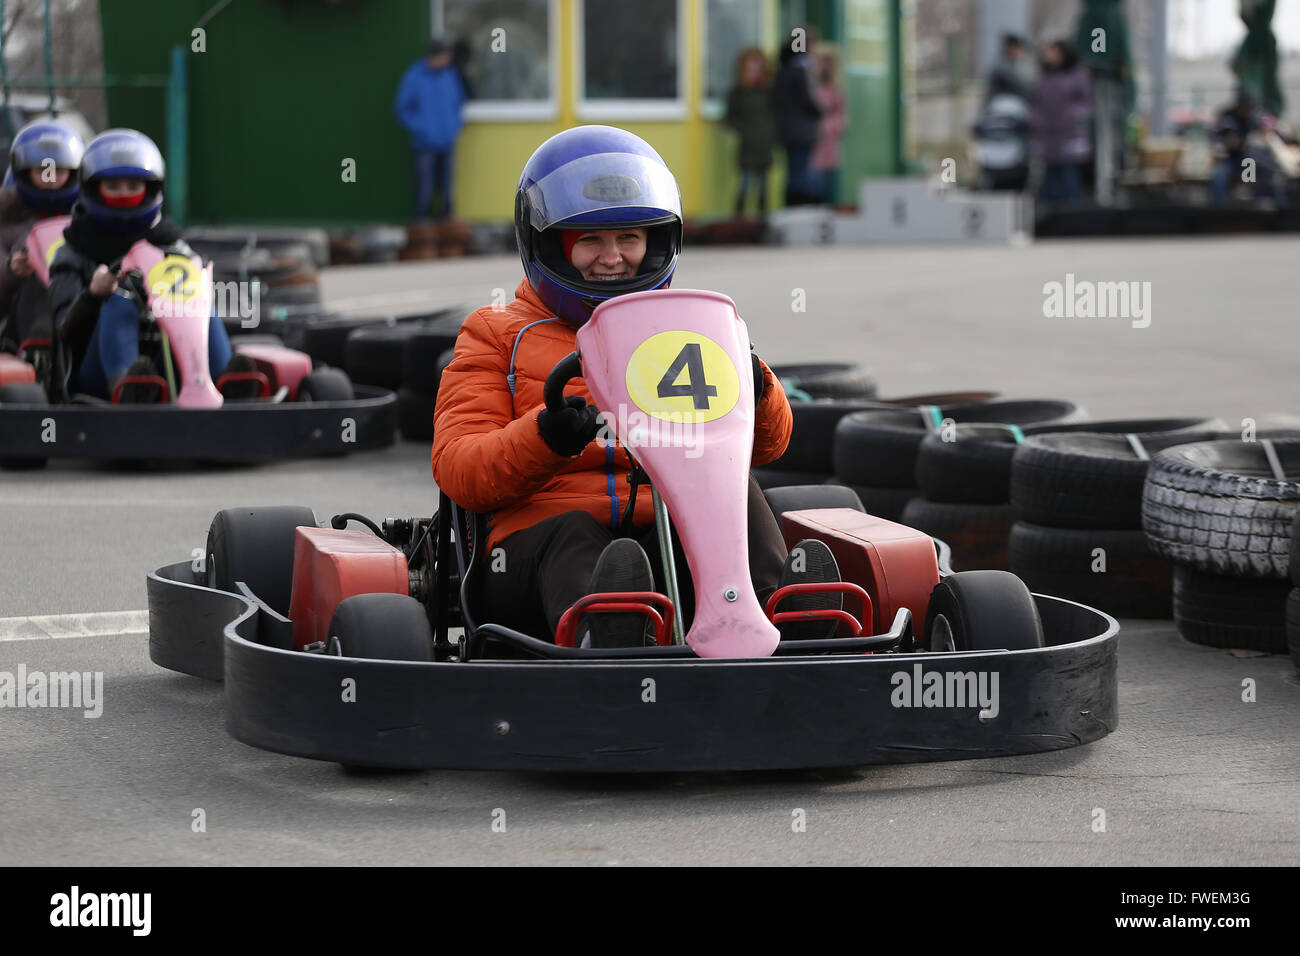 girl is driving Go-kart car with speed in a playground racing track. Go kart is a popular leisure motor sports. Stock Photo